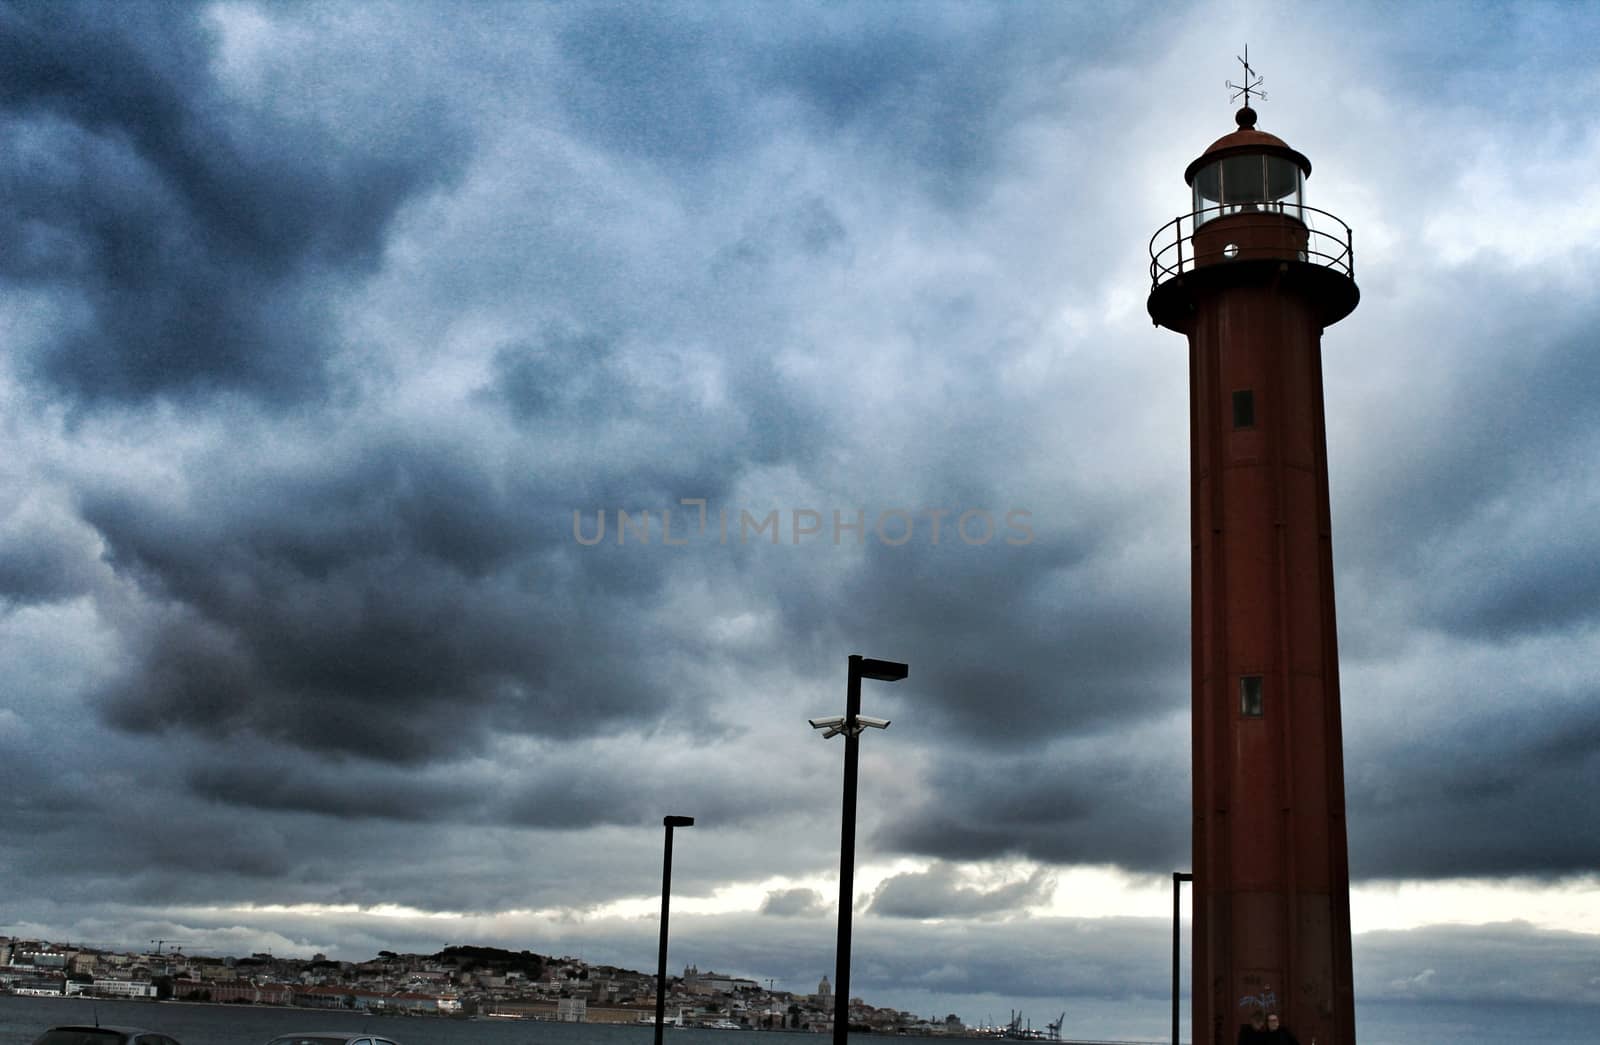 Red lighthouse in the port of Cacilhas village in Lisbon on a gray and cloudy day